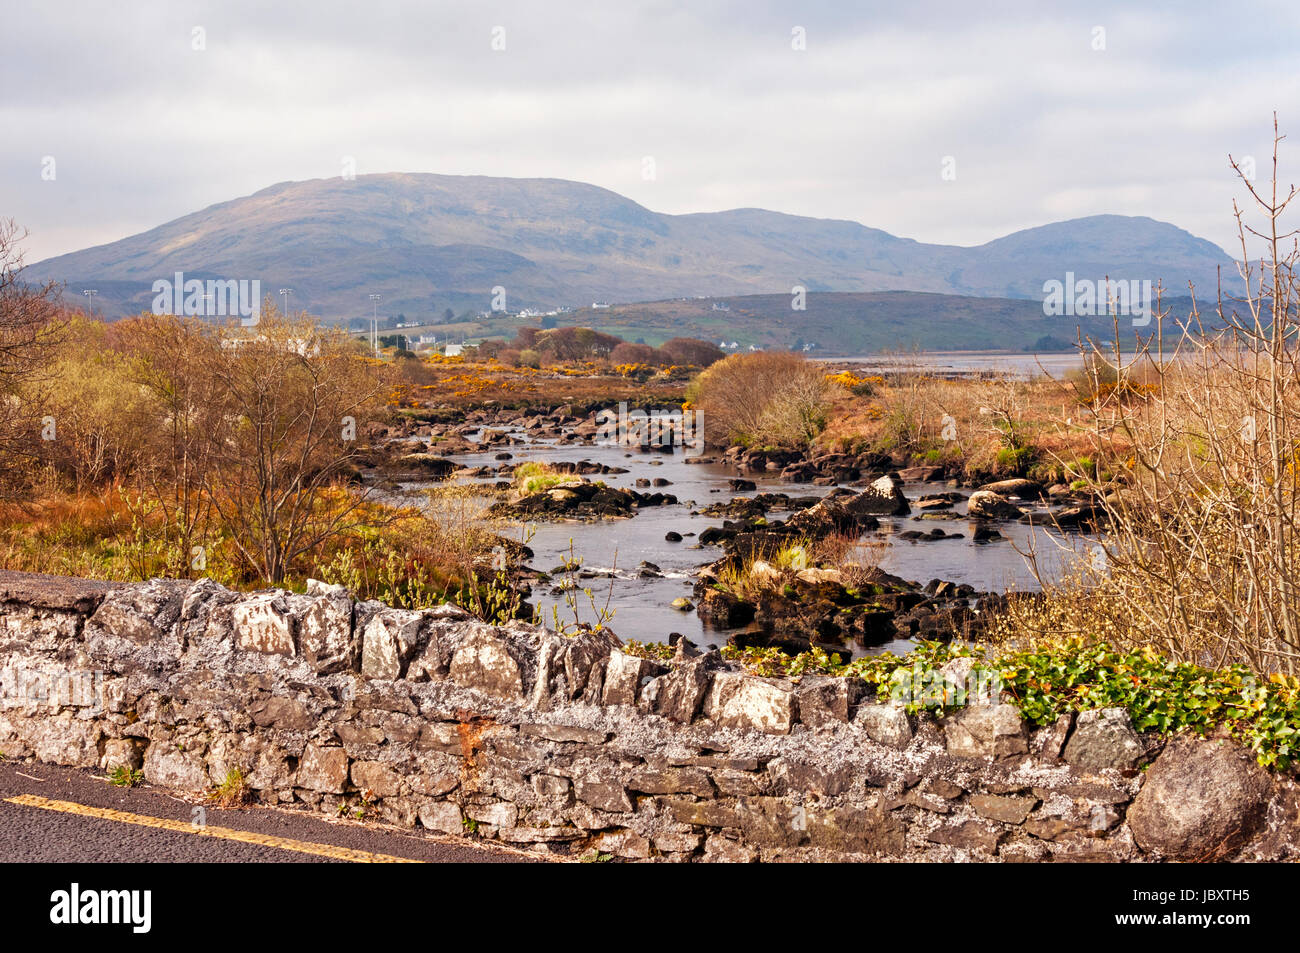 The scenery on the road out of Ardara, County Donegal, Ireland Stock Photo